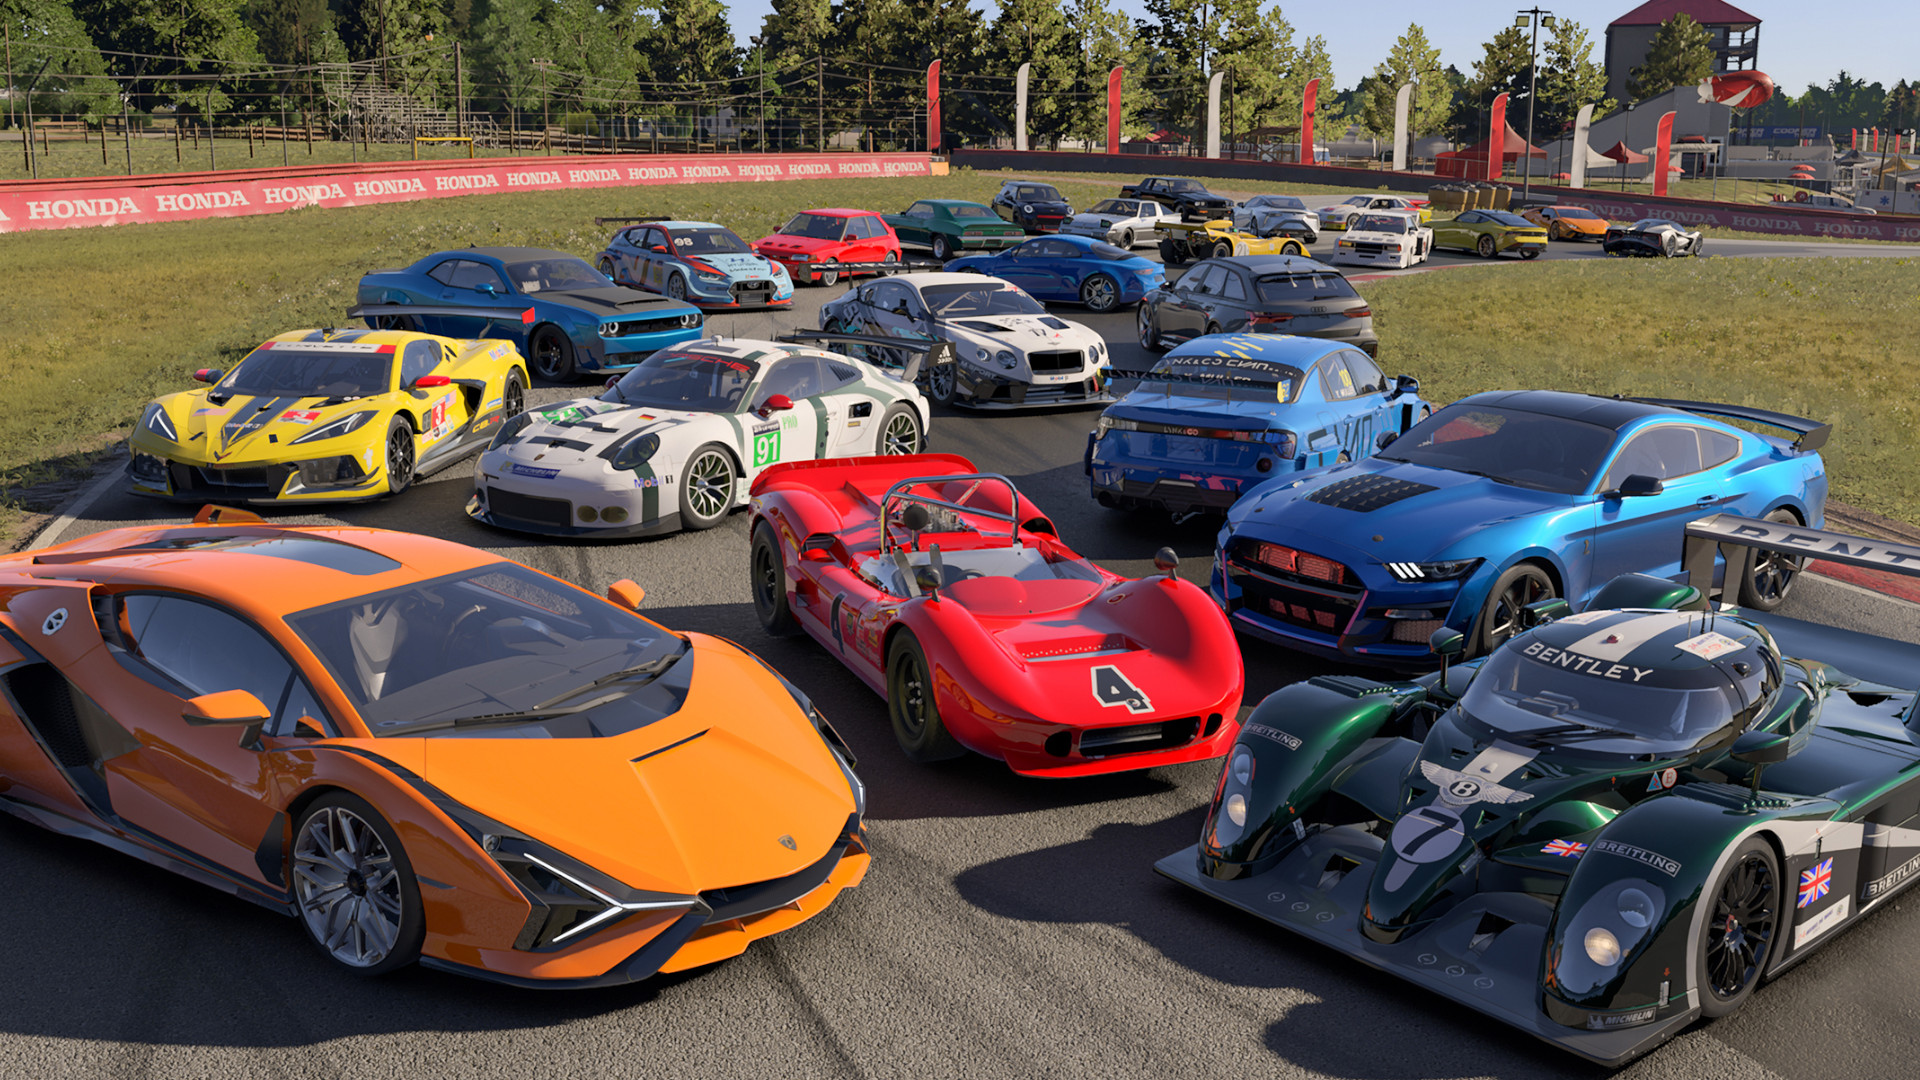 Here are all the 'Forza Horizon 3' cars revealed so far